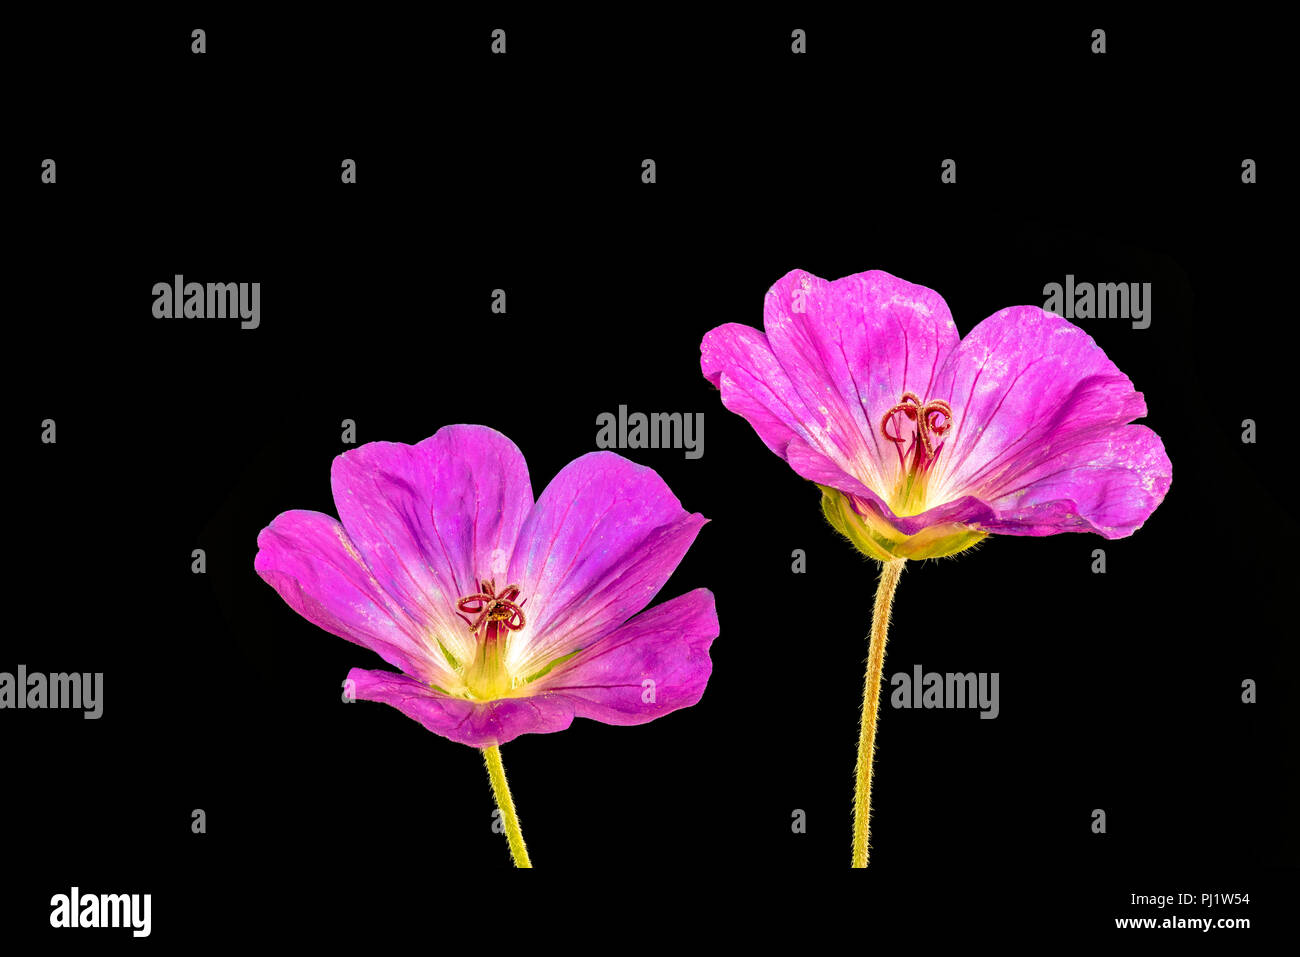 Fine art still life color floral image of a pair of pink isolated wide open pink blooming female geranium/cranesbill flowers,stem,black background Stock Photo